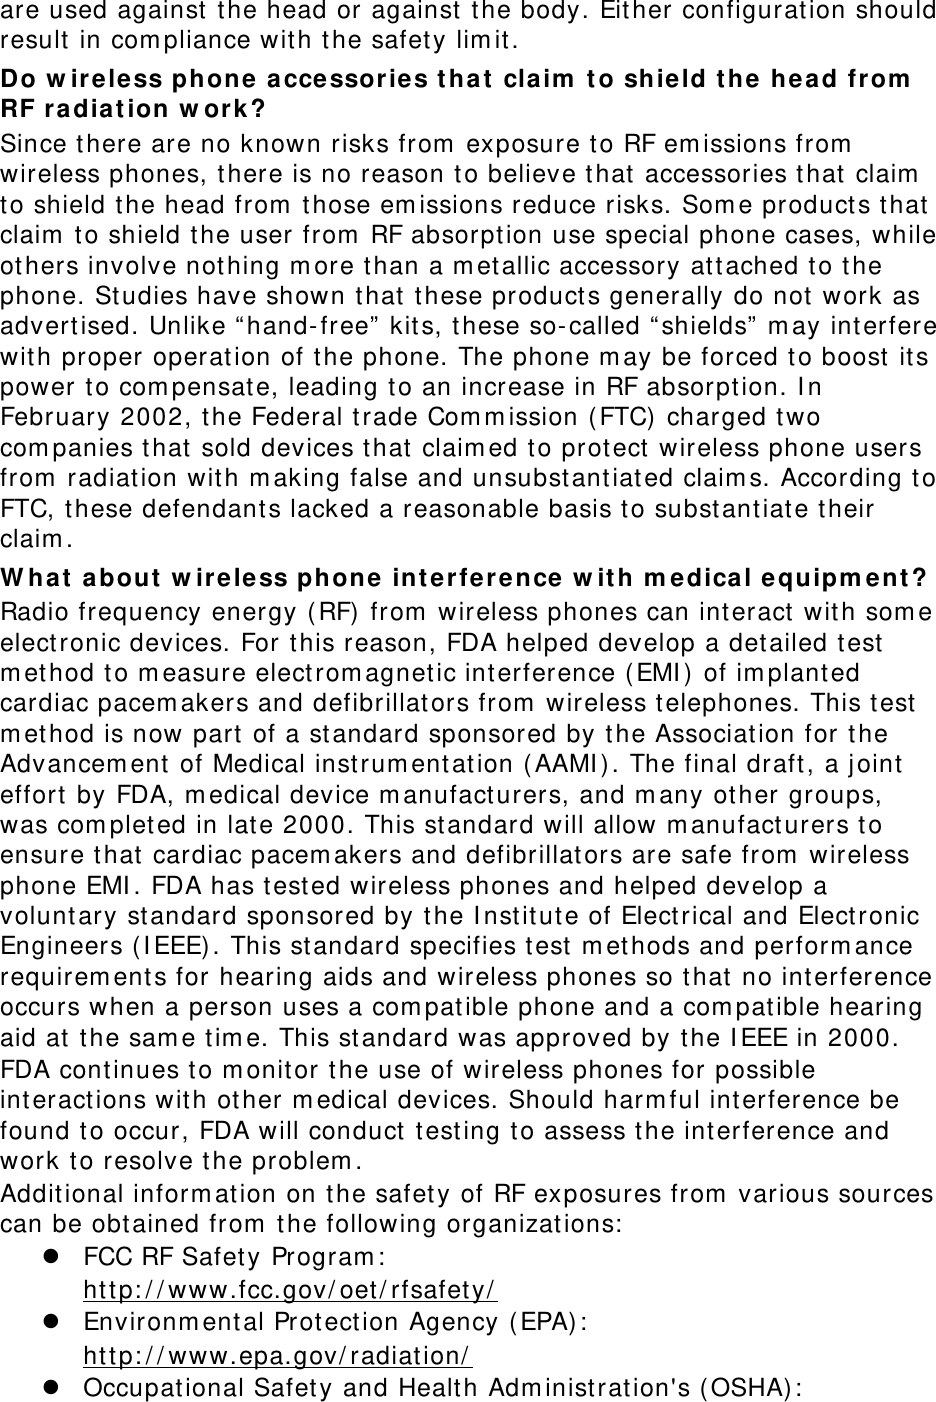 are used against the head or against the body. Either configuration should result in compliance with the safety limit. Do wireless phone accessories that claim to shield the head from RF radiation work? Since there are no known risks from exposure to RF emissions from wireless phones, there is no reason to believe that accessories that claim to shield the head from those emissions reduce risks. Some products that claim to shield the user from RF absorption use special phone cases, while others involve nothing more than a metallic accessory attached to the phone. Studies have shown that these products generally do not work as advertised. Unlike “hand-free” kits, these so-called “shields” may interfere with proper operation of the phone. The phone may be forced to boost its power to compensate, leading to an increase in RF absorption. In February 2002, the Federal trade Commission (FTC) charged two companies that sold devices that claimed to protect wireless phone users from radiation with making false and unsubstantiated claims. According to FTC, these defendants lacked a reasonable basis to substantiate their claim. What about wireless phone interference with medical equipment? Radio frequency energy (RF) from wireless phones can interact with some electronic devices. For this reason, FDA helped develop a detailed test method to measure electromagnetic interference (EMI) of implanted cardiac pacemakers and defibrillators from wireless telephones. This test method is now part of a standard sponsored by the Association for the Advancement of Medical instrumentation (AAMI). The final draft, a joint effort by FDA, medical device manufacturers, and many other groups, was completed in late 2000. This standard will allow manufacturers to ensure that cardiac pacemakers and defibrillators are safe from wireless phone EMI. FDA has tested wireless phones and helped develop a voluntary standard sponsored by the Institute of Electrical and Electronic Engineers (IEEE). This standard specifies test methods and performance requirements for hearing aids and wireless phones so that no interference occurs when a person uses a compatible phone and a compatible hearing aid at the same time. This standard was approved by the IEEE in 2000. FDA continues to monitor the use of wireless phones for possible interactions with other medical devices. Should harmful interference be found to occur, FDA will conduct testing to assess the interference and work to resolve the problem. Additional information on the safety of RF exposures from various sources can be obtained from the following organizations: z FCC RF Safety Program:  http://www.fcc.gov/oet/rfsafety/ z Environmental Protection Agency (EPA):  http://www.epa.gov/radiation/ z Occupational Safety and Health Administration&apos;s (OSHA):  